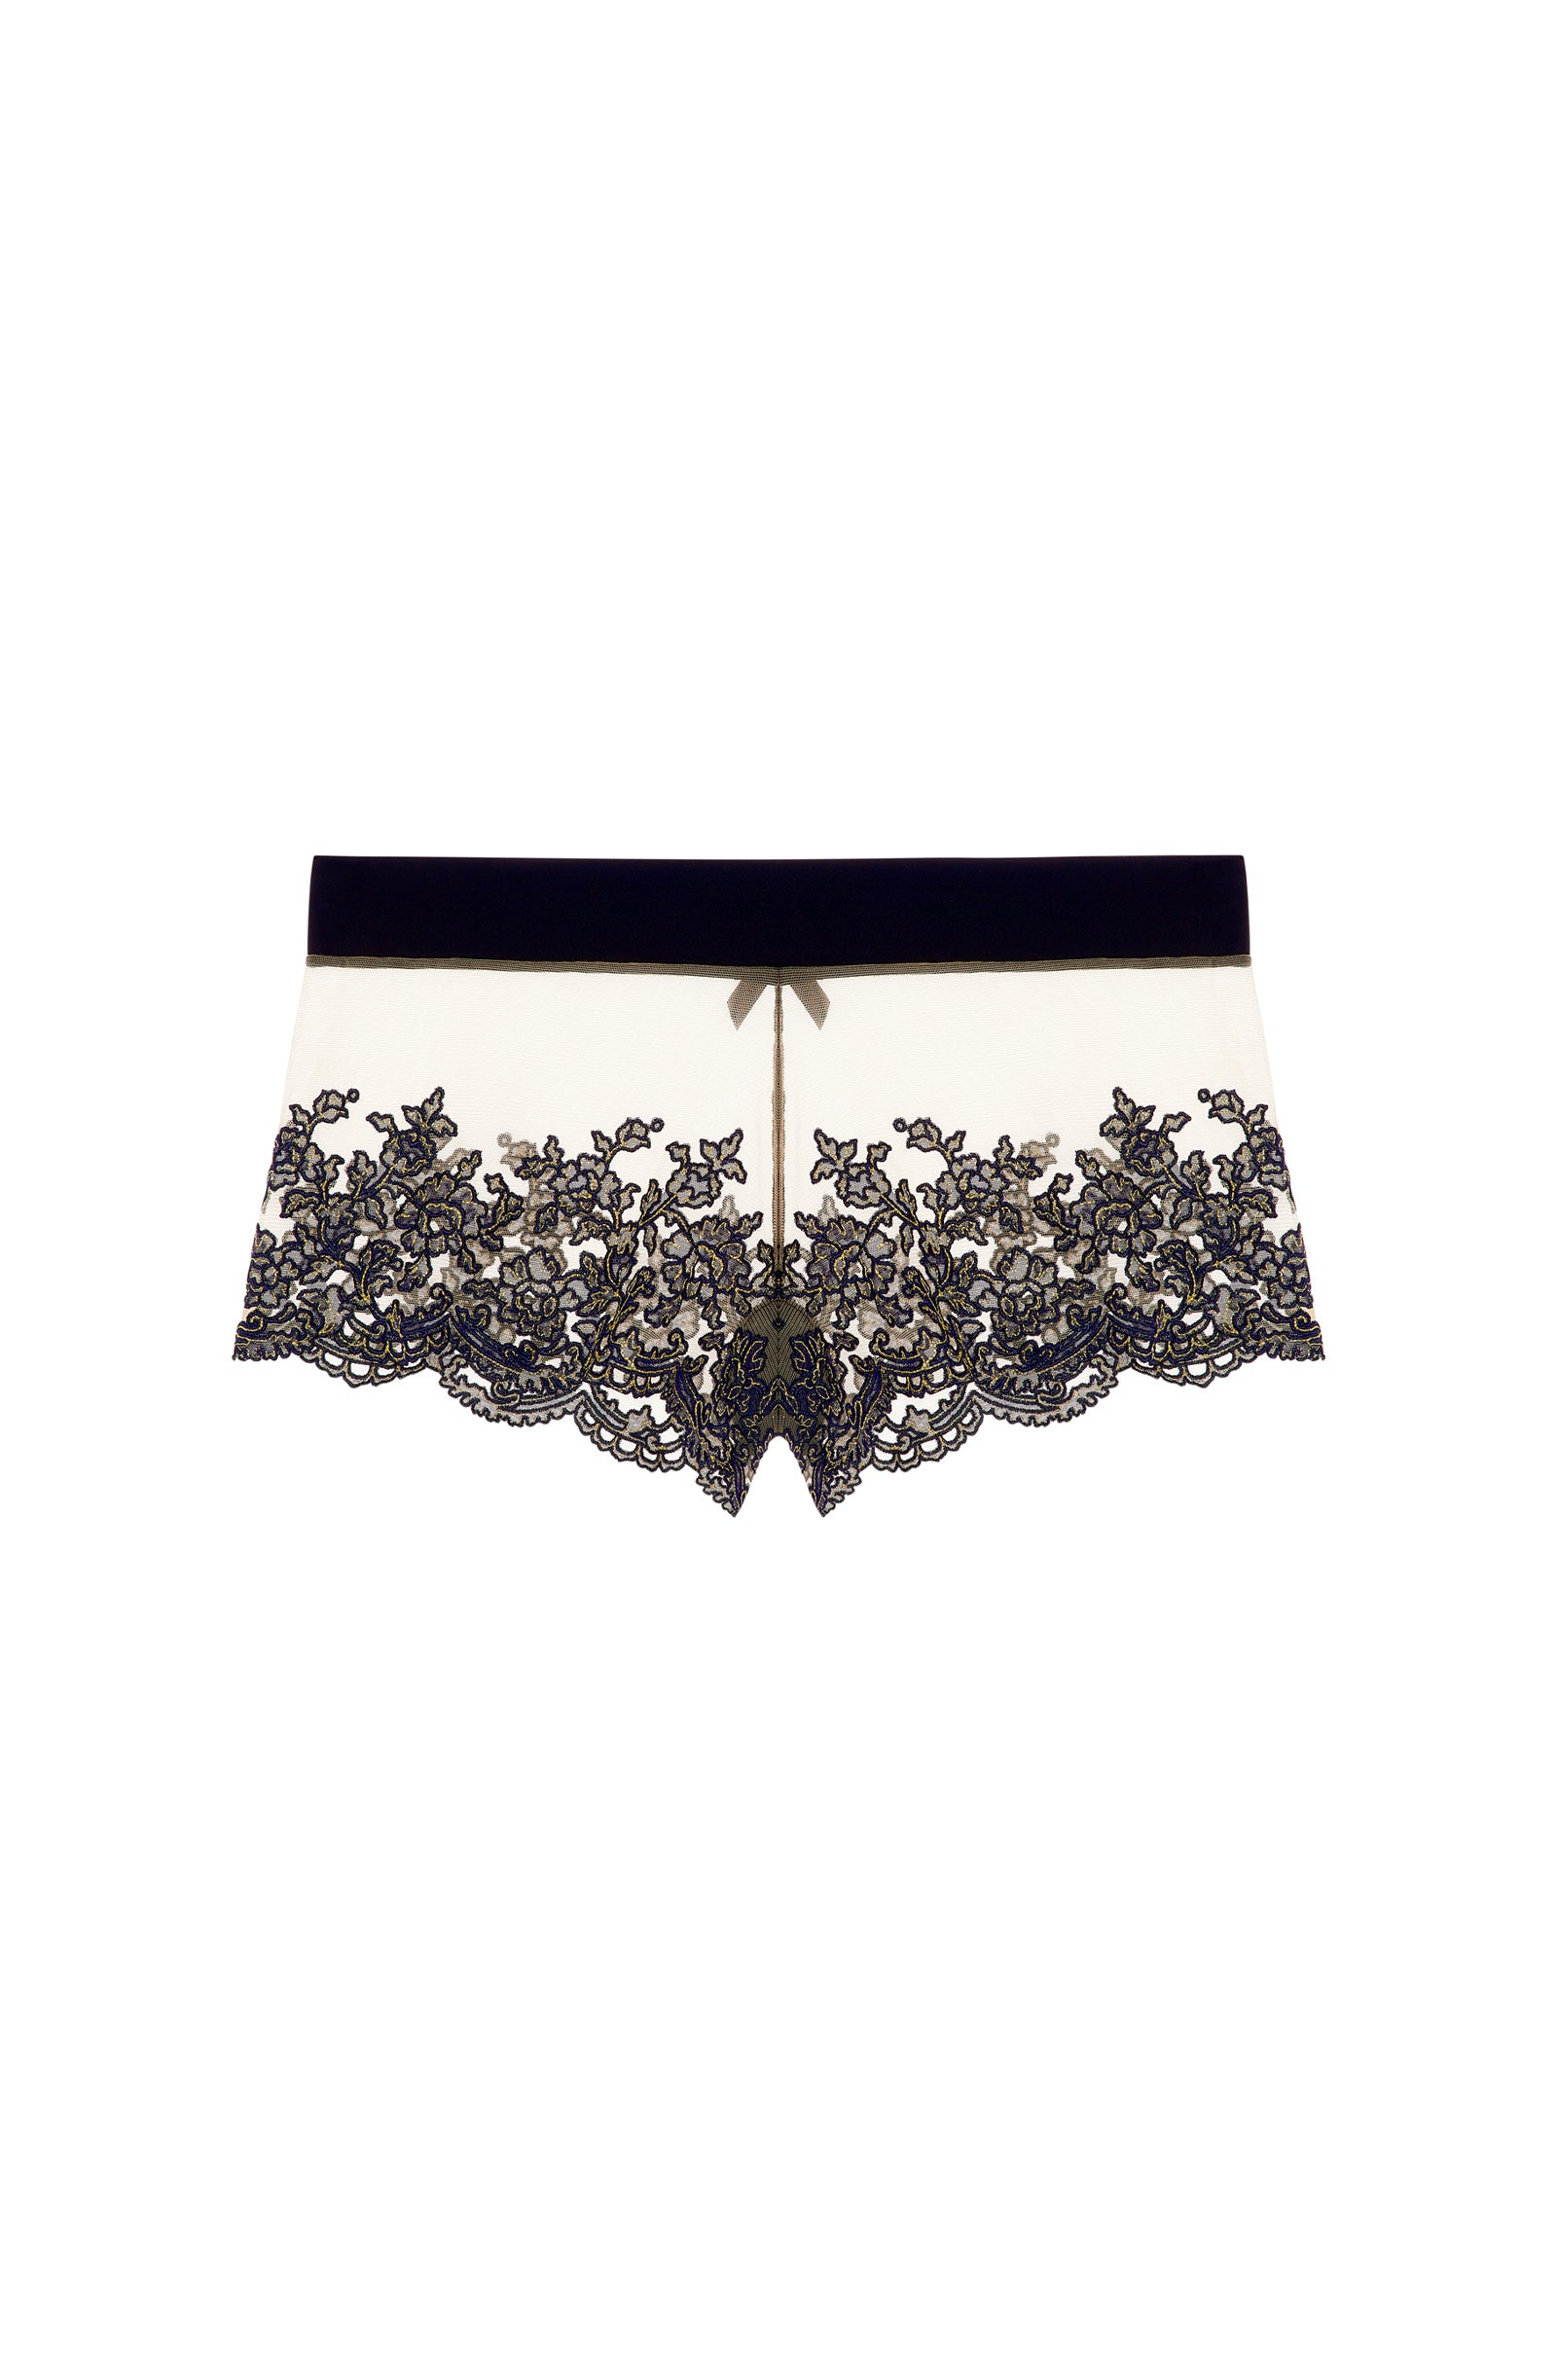 desiree Transparent tulle boyshorts, golden and navy embroidery